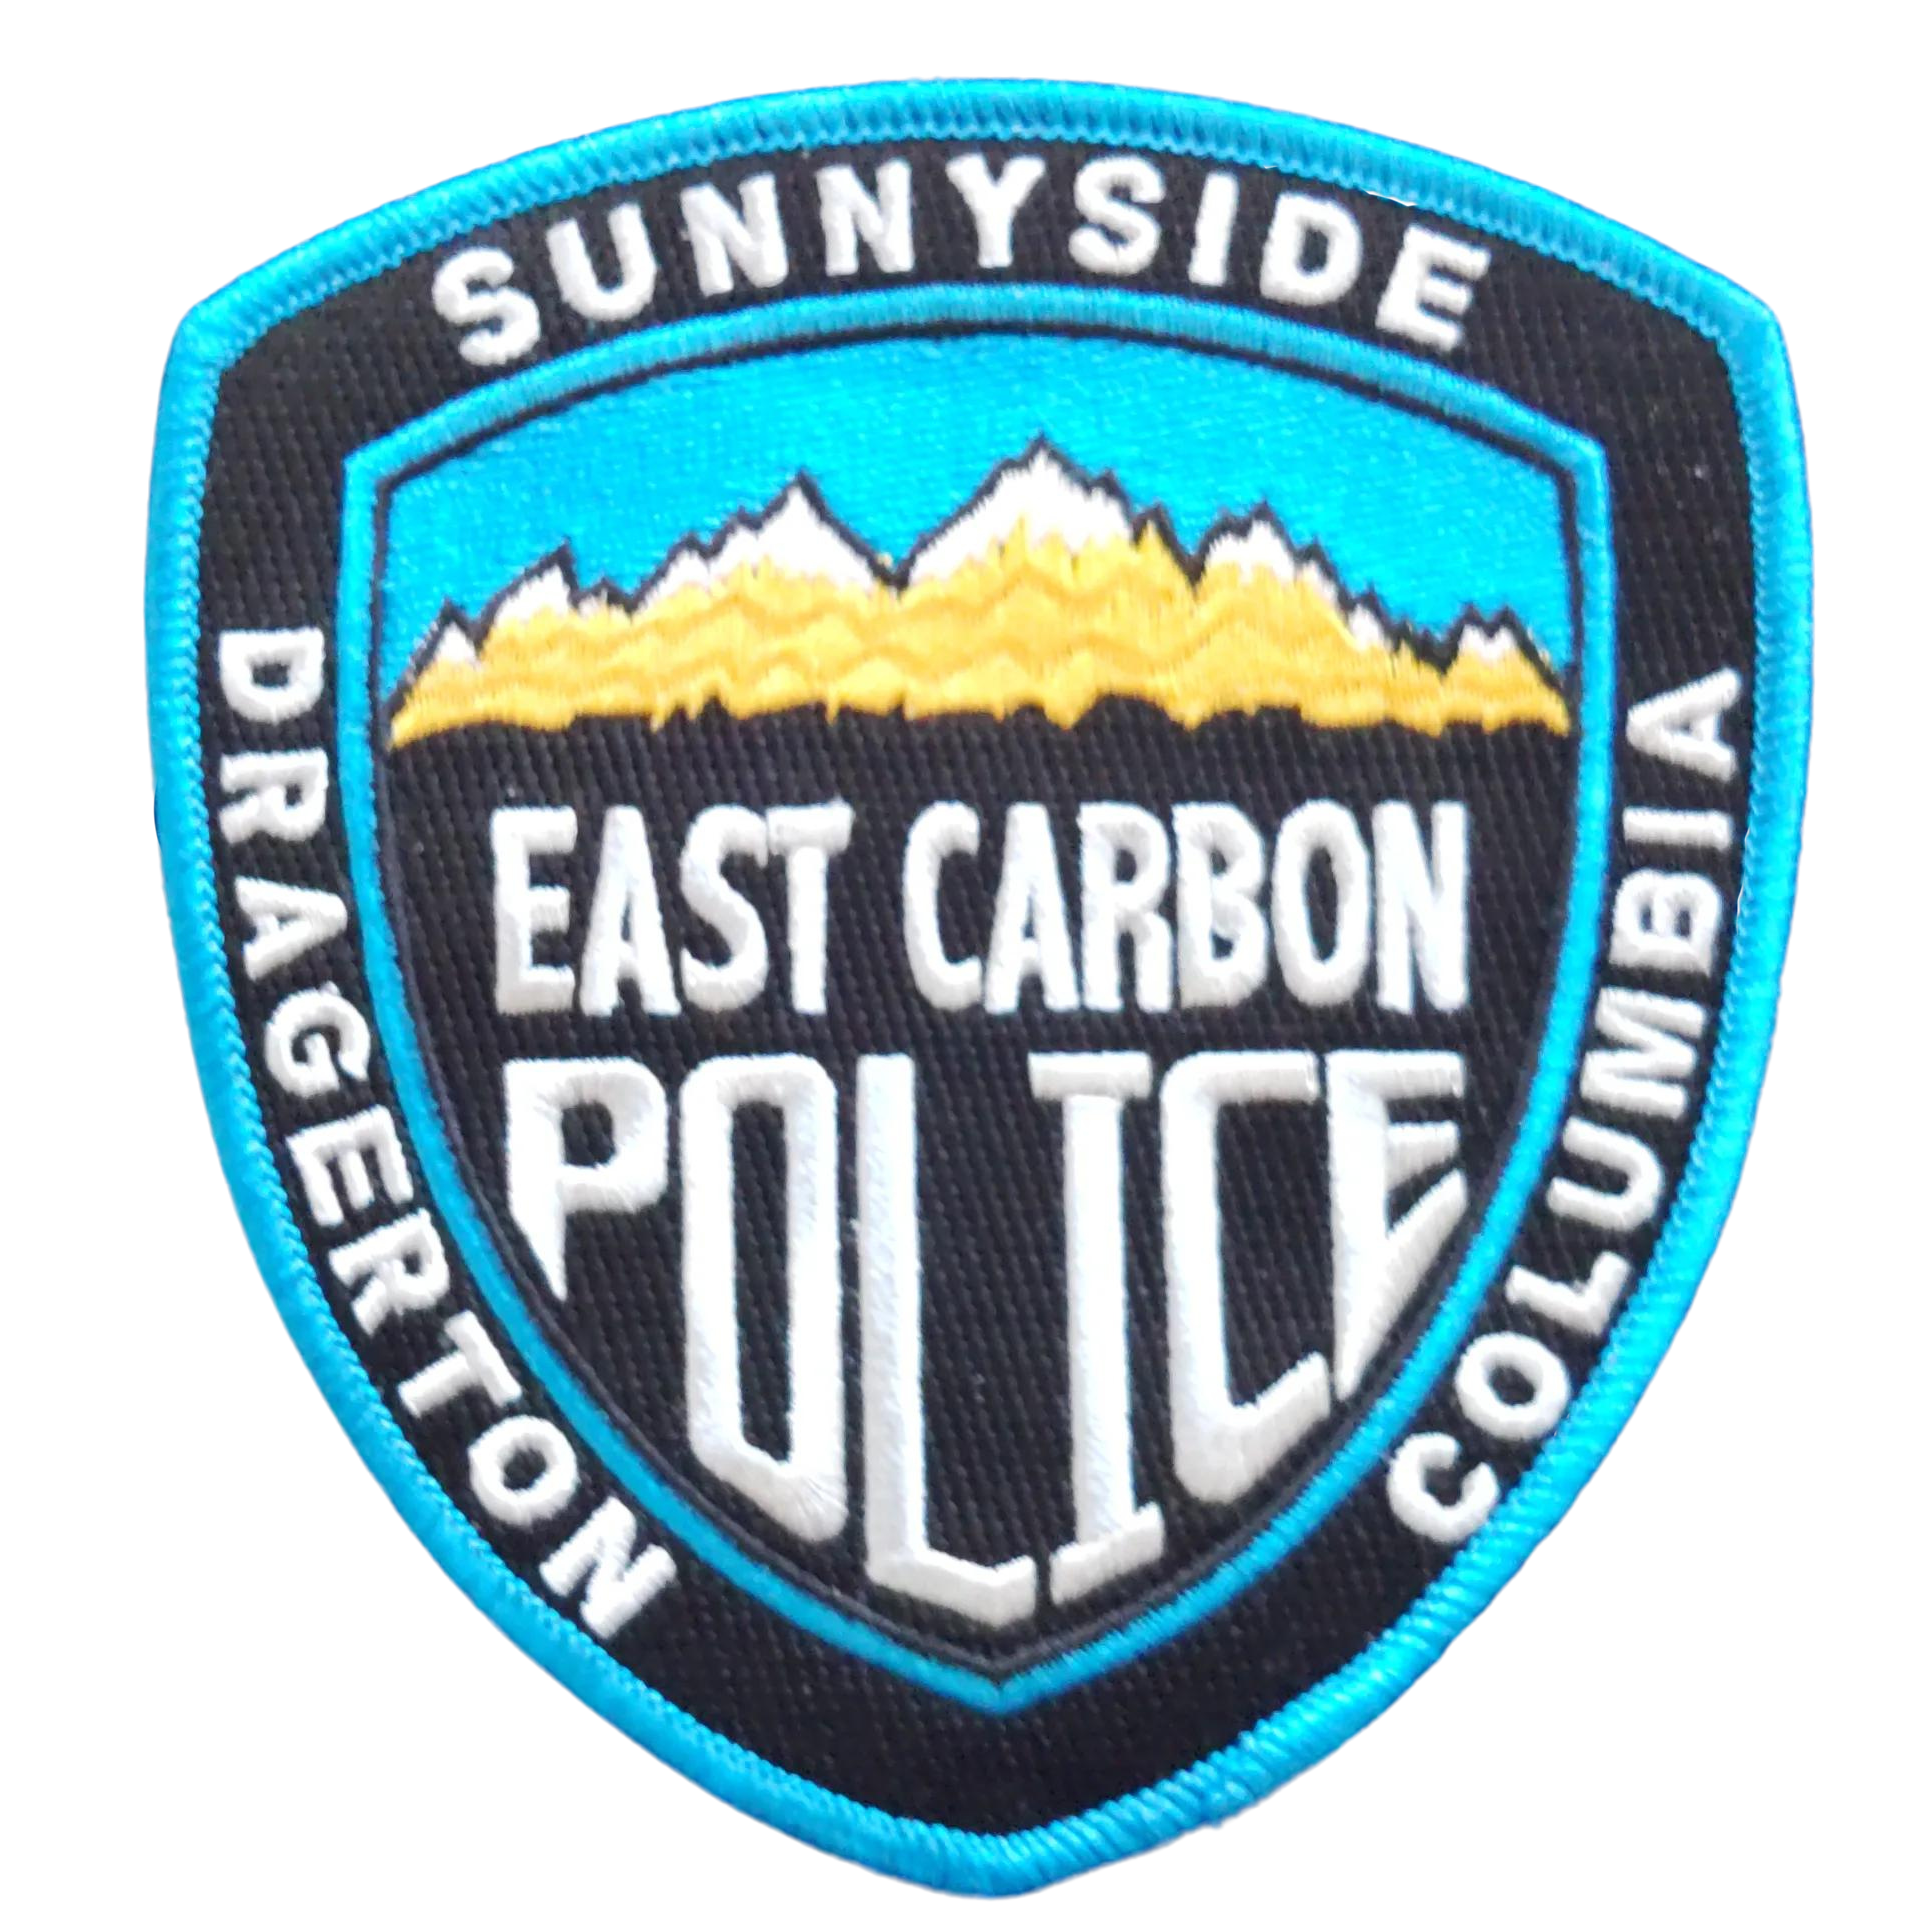 East Carbon Police Department